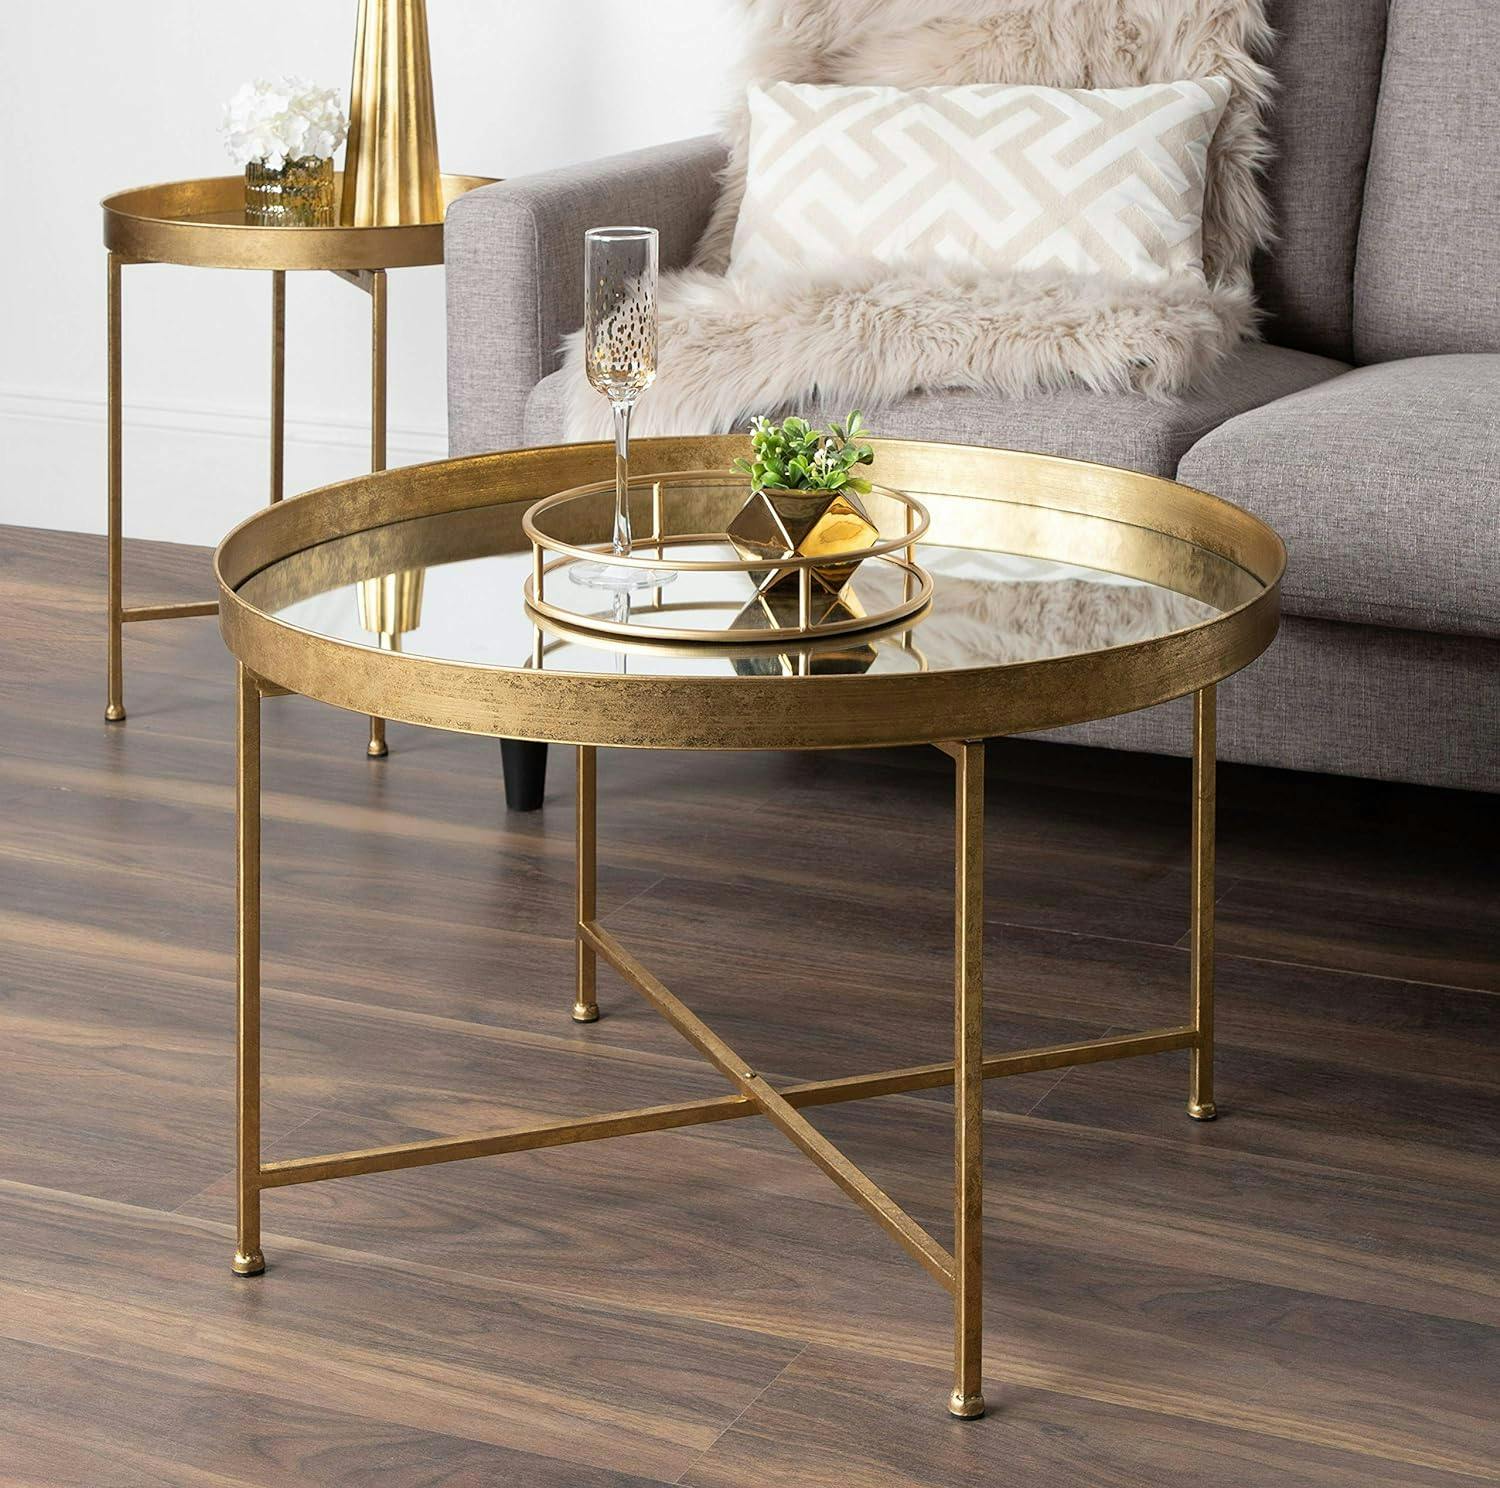 Luxurious Gold and Mirrored Round Wood Coffee Table